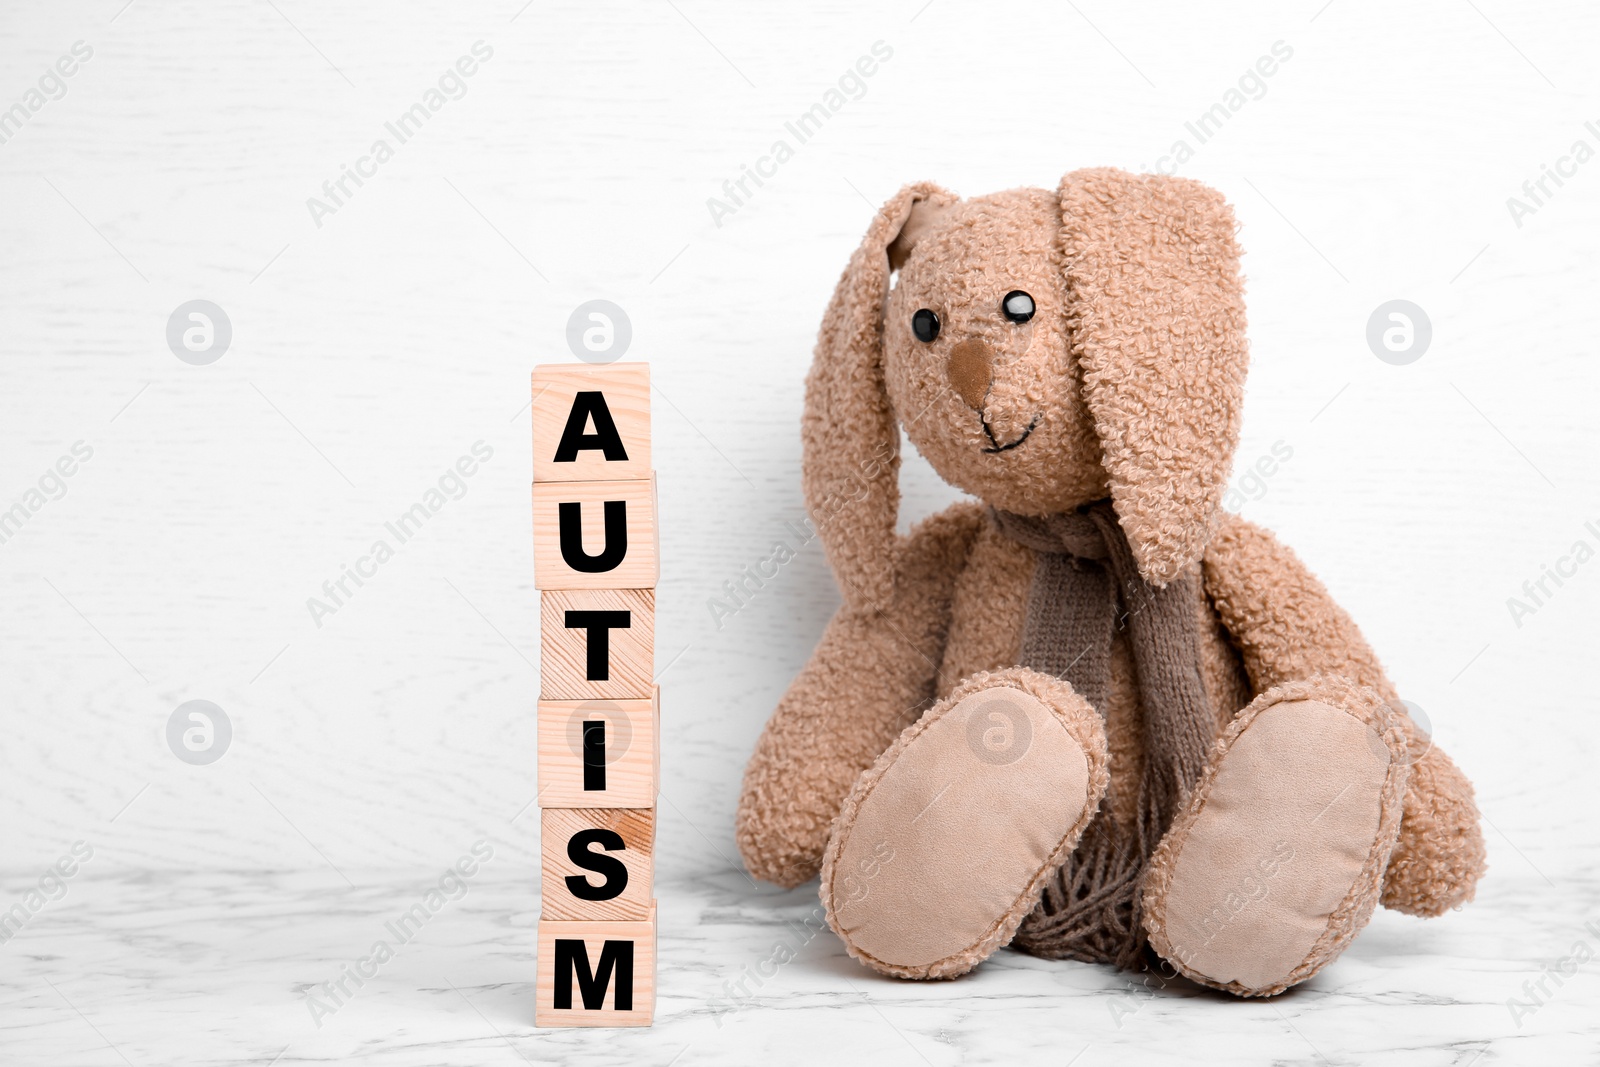 Photo of Toy bunny and wooden cubes with word AUTISM on table against light background